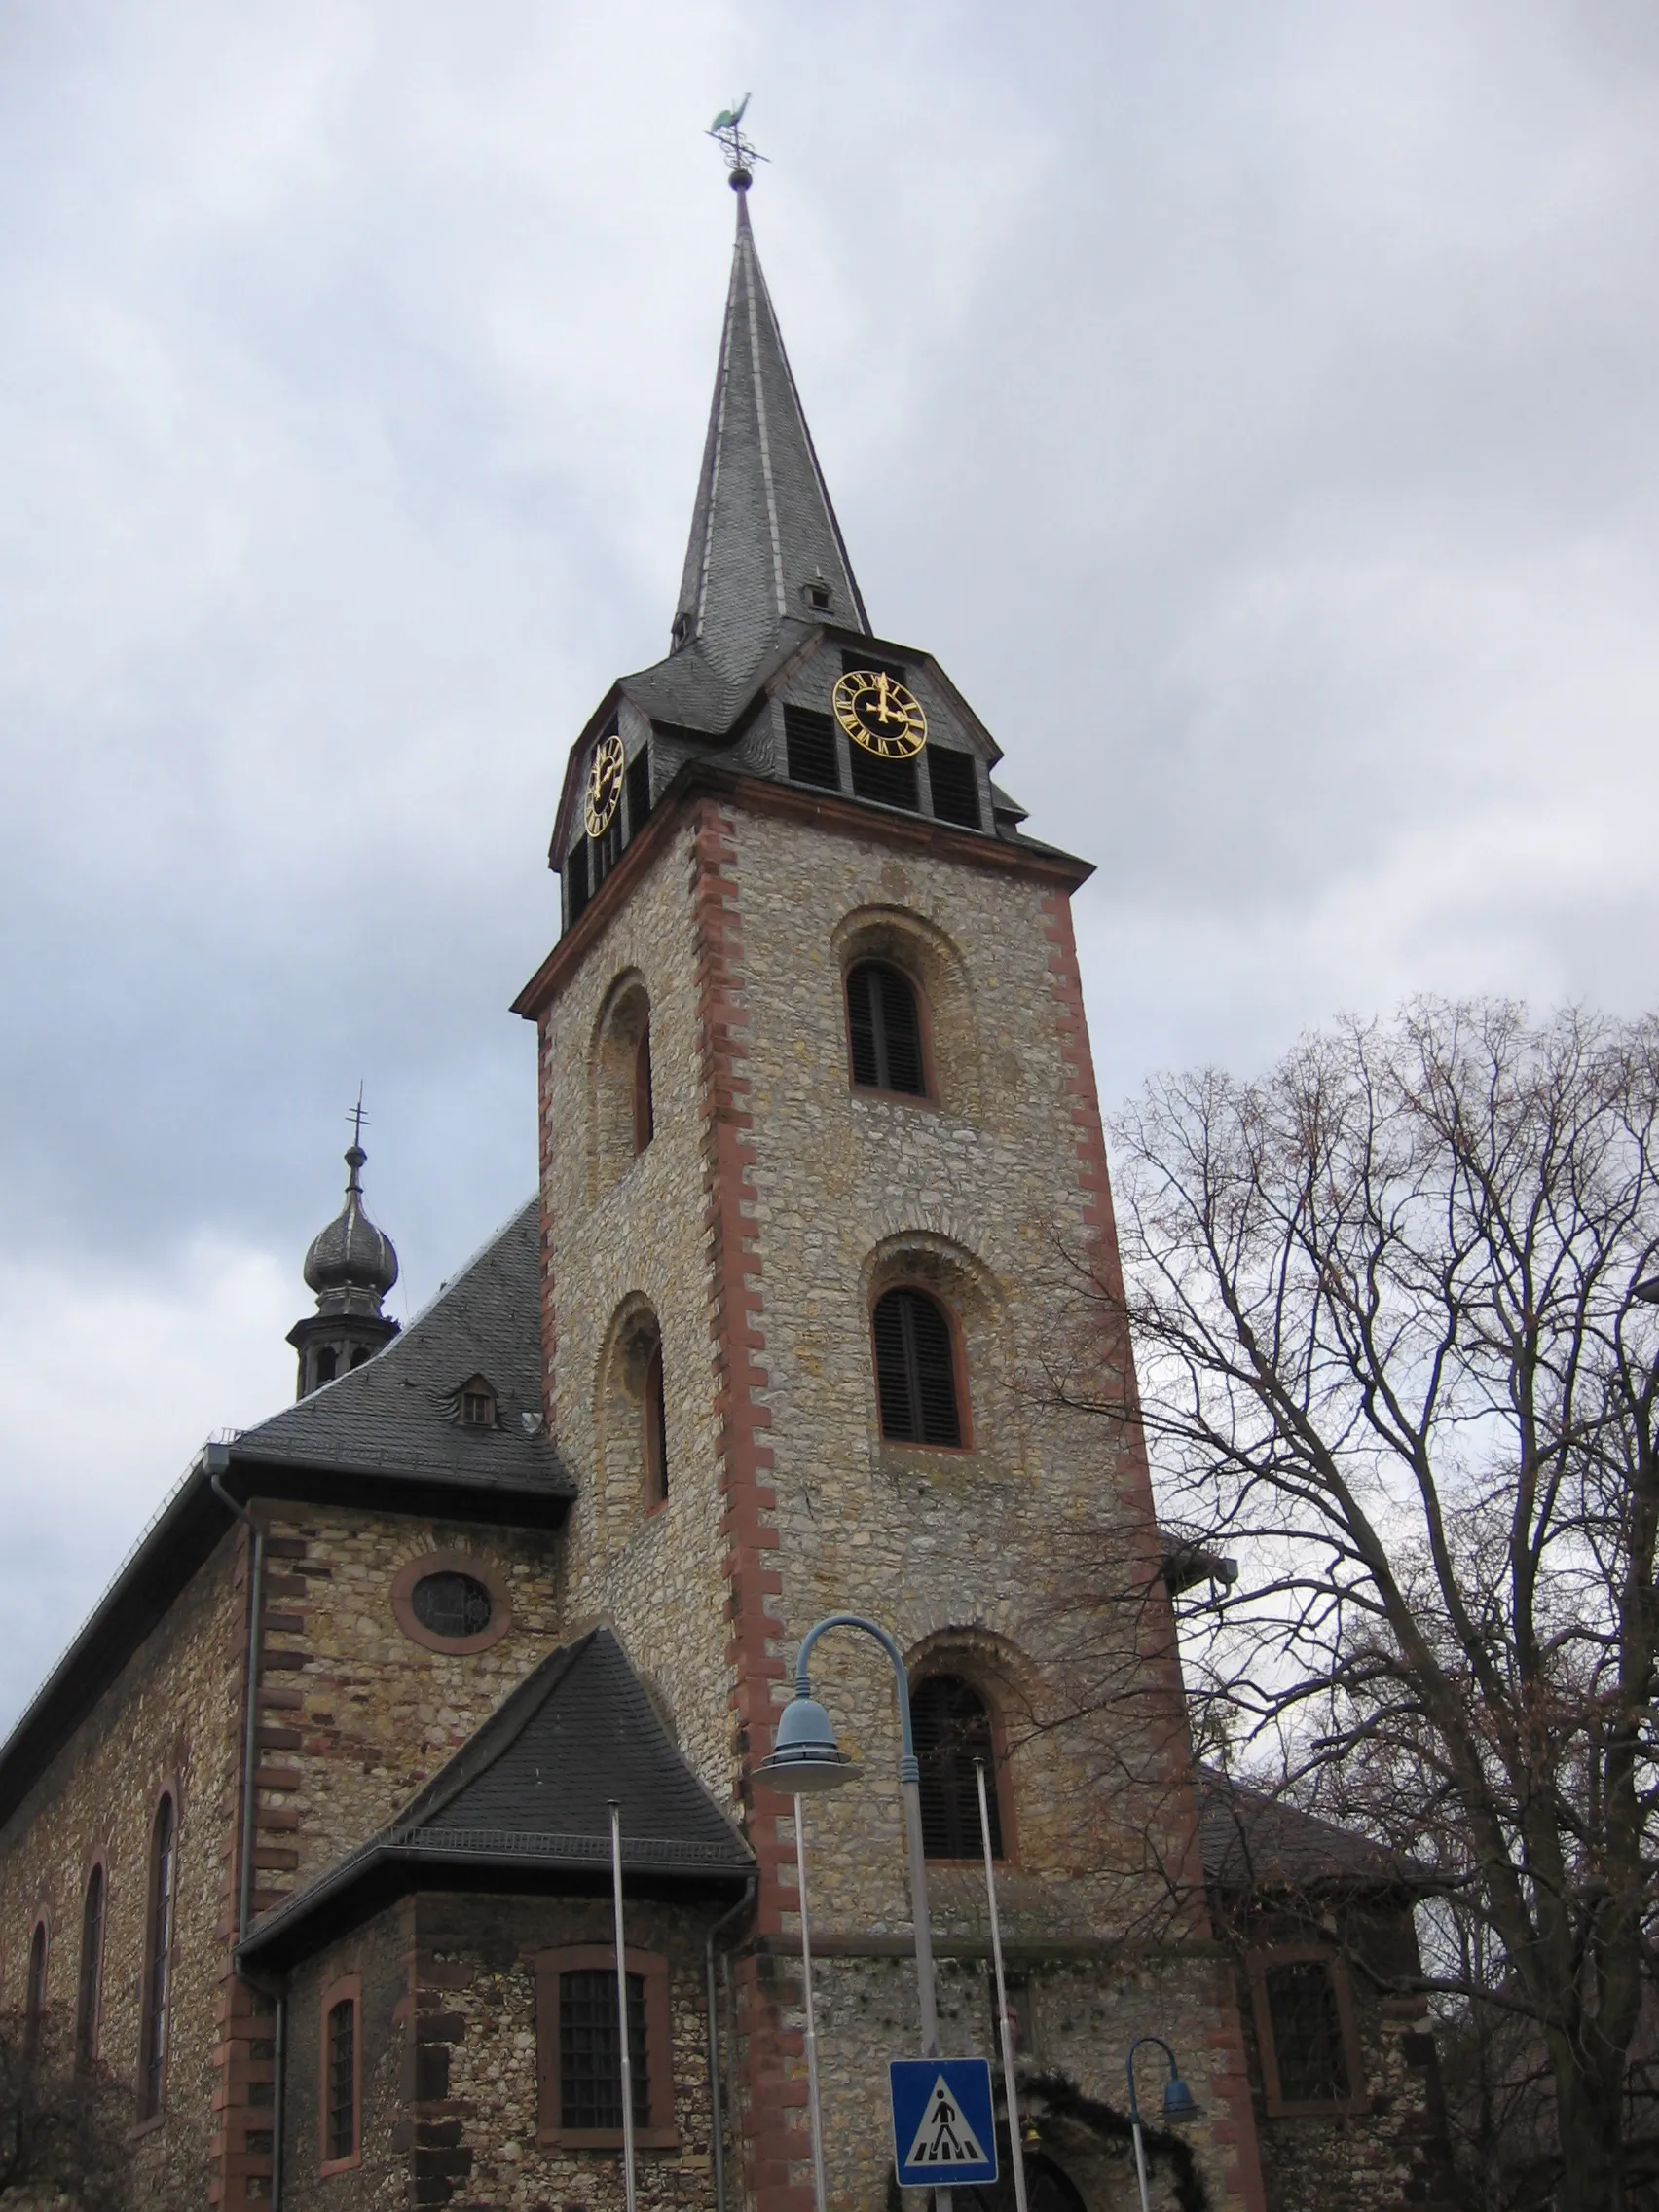 Photo showing: Tower of the church in Floersheim